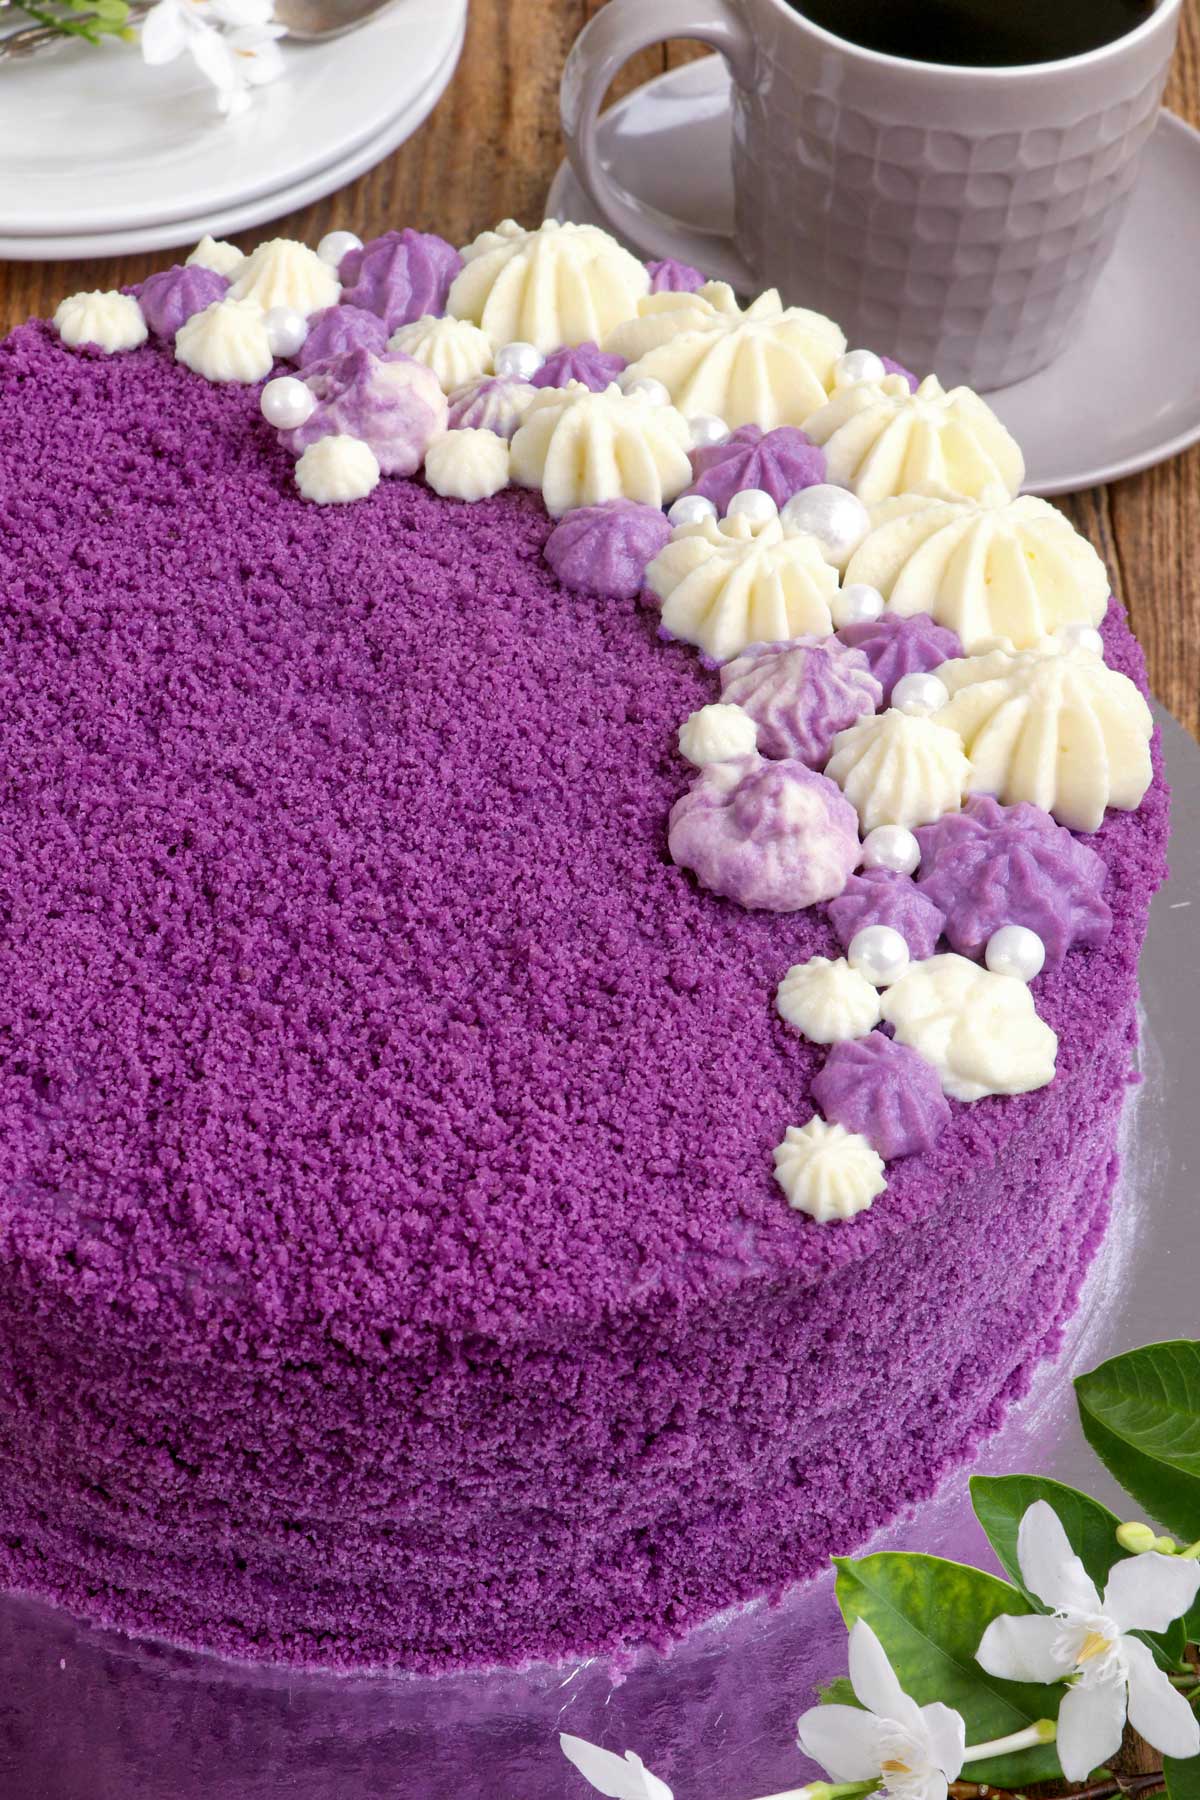 Purple Yam Cake with covered with ube-flavored cream cheese frosting and crumbs, on a serving plate.